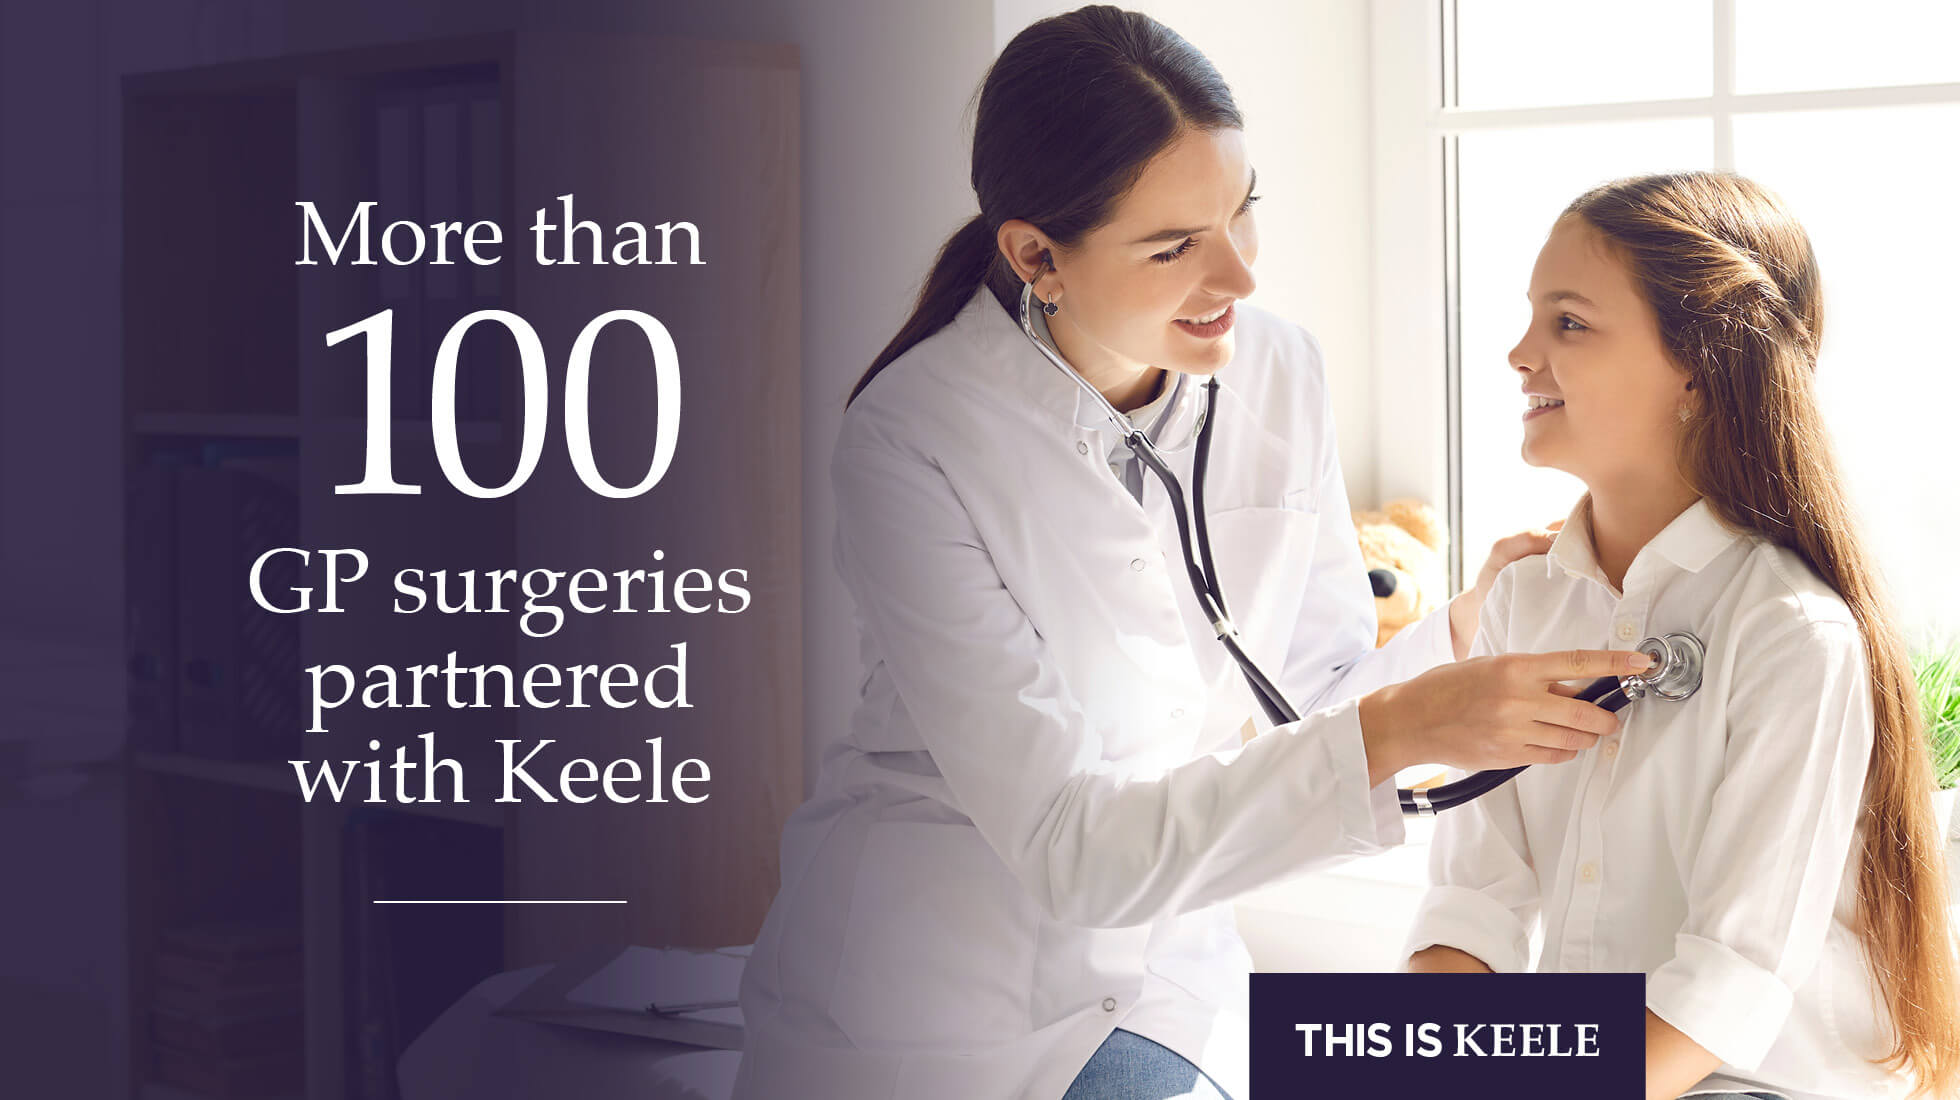 More than 100 GP surgeries partnered with Keele